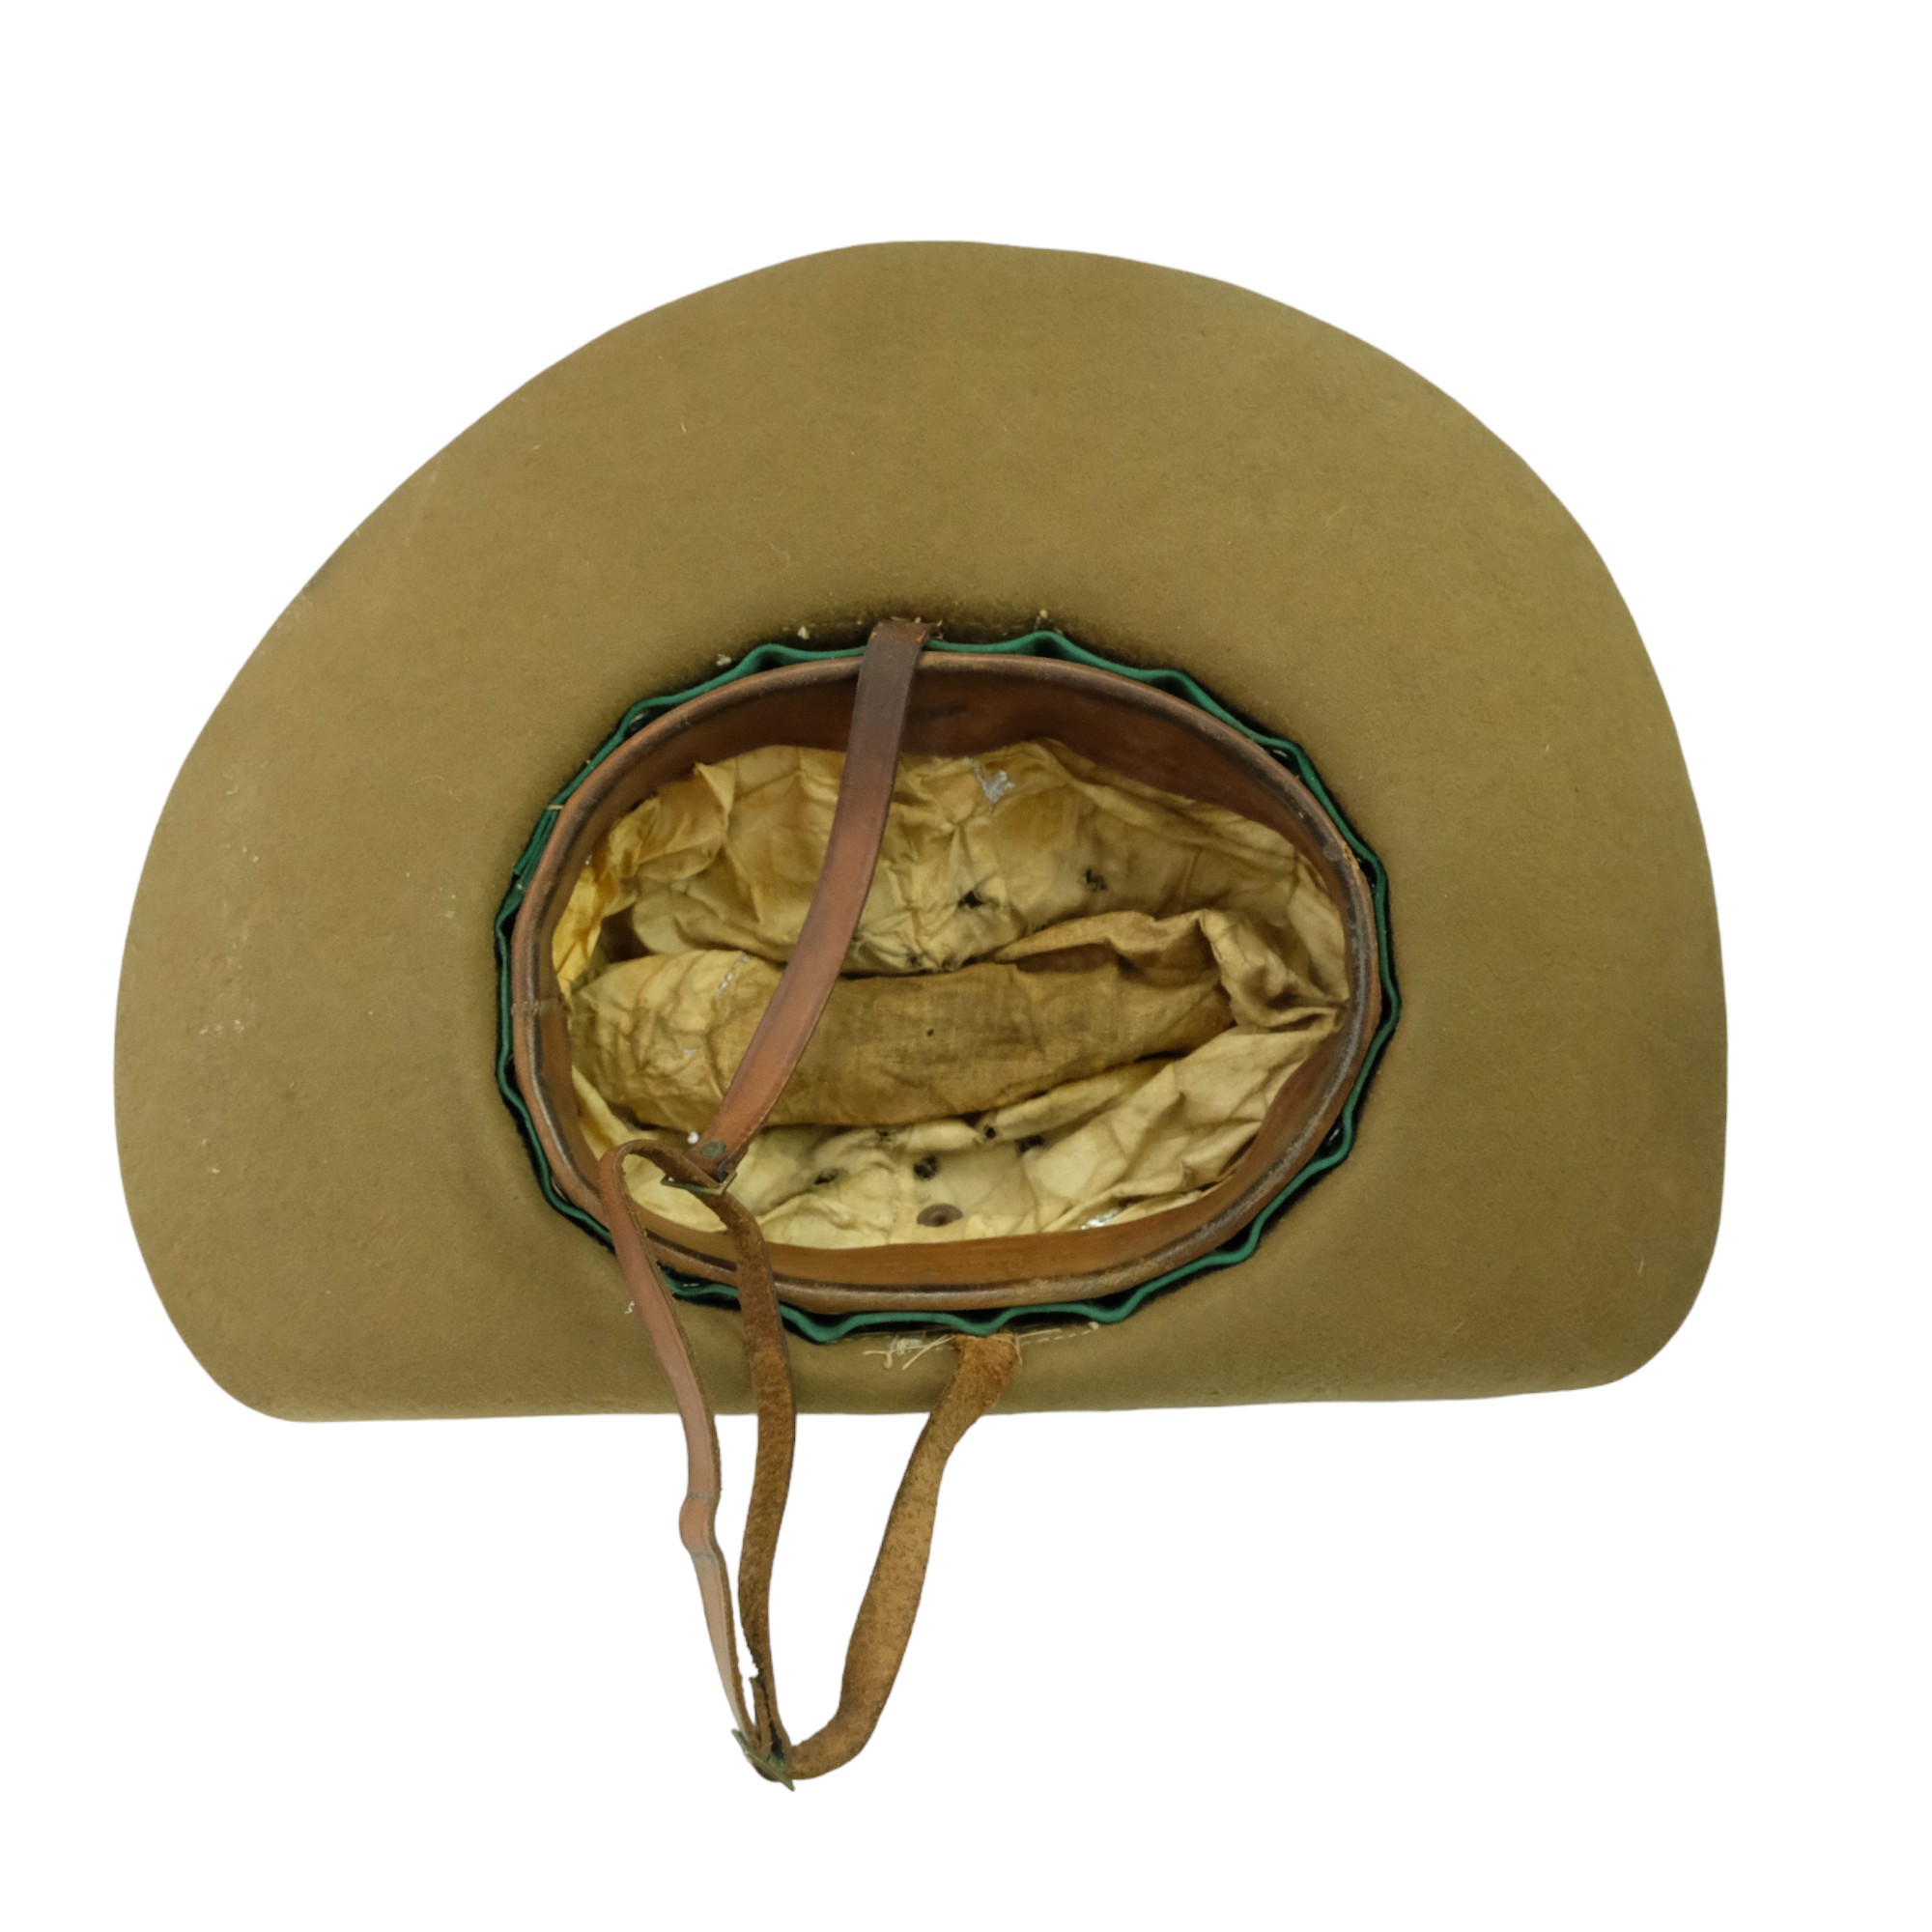 A 1945 Royal Army Medical Corps officer's bush hat, bearing the inscribed name Lieut Frith and an - Image 6 of 7